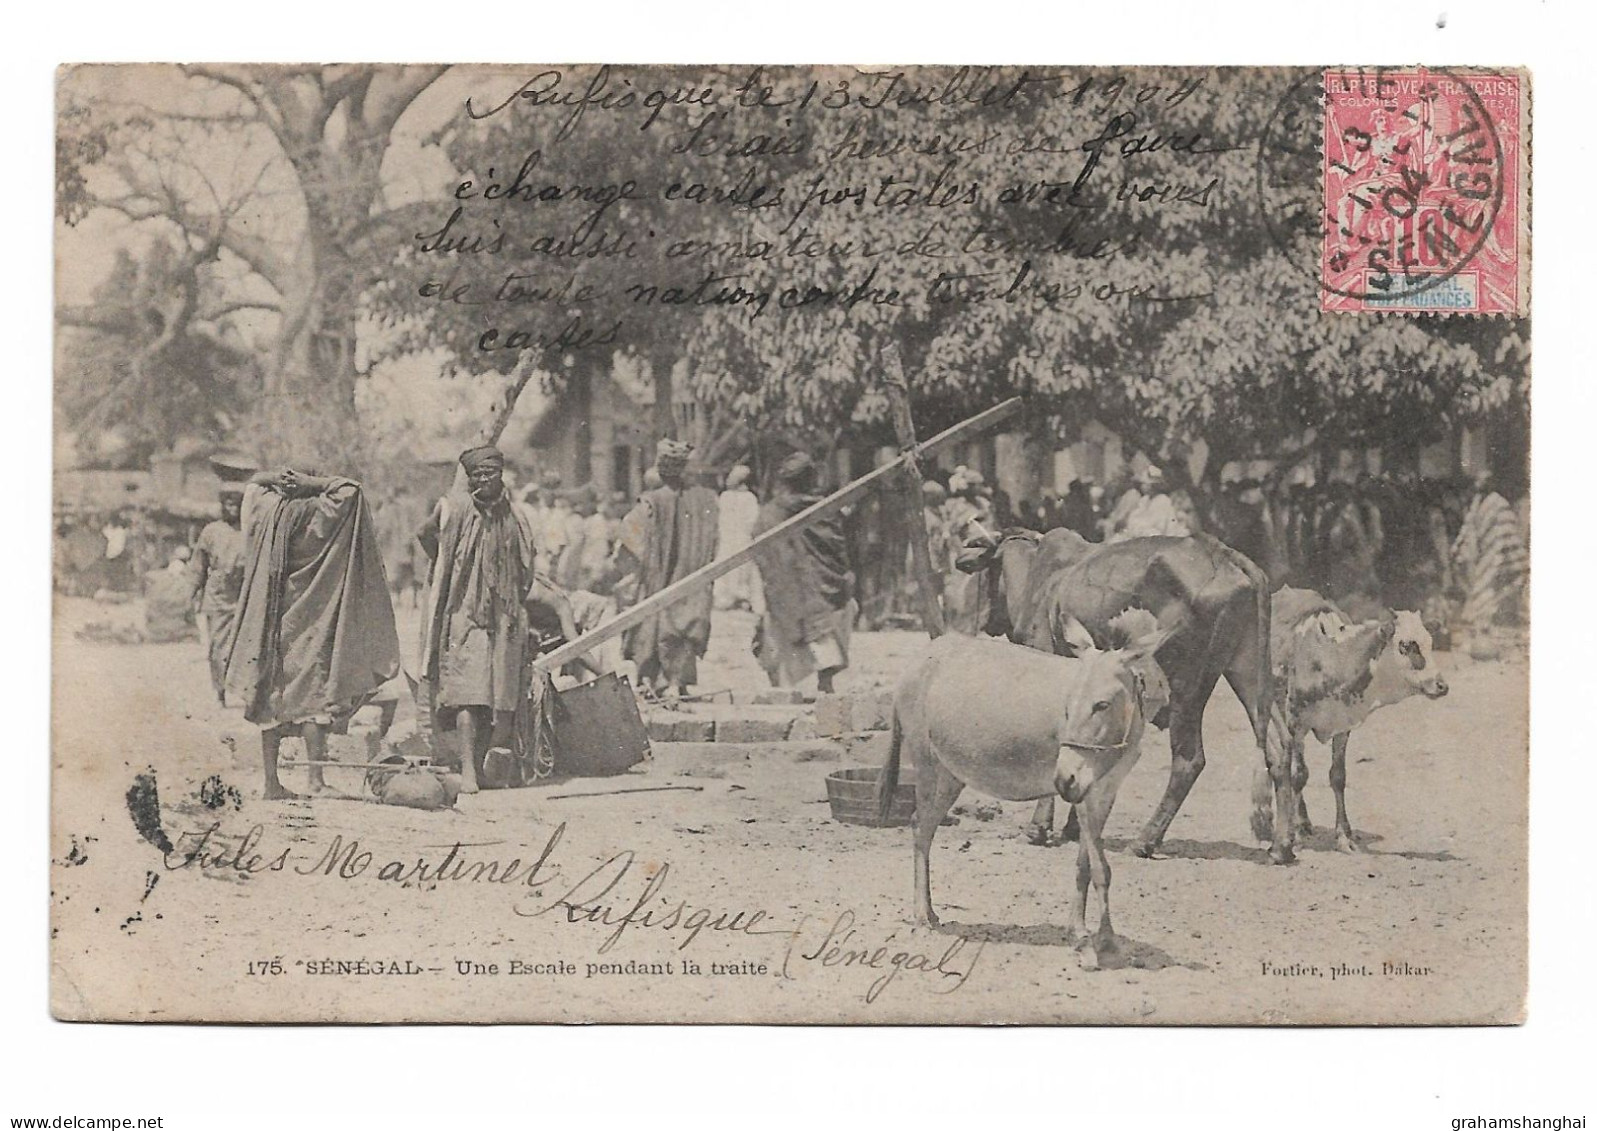 Postcard Senegal Escale Pendant La Traite Native People Animals Undivided Posted 1904 French Colonial Stamp - Senegal